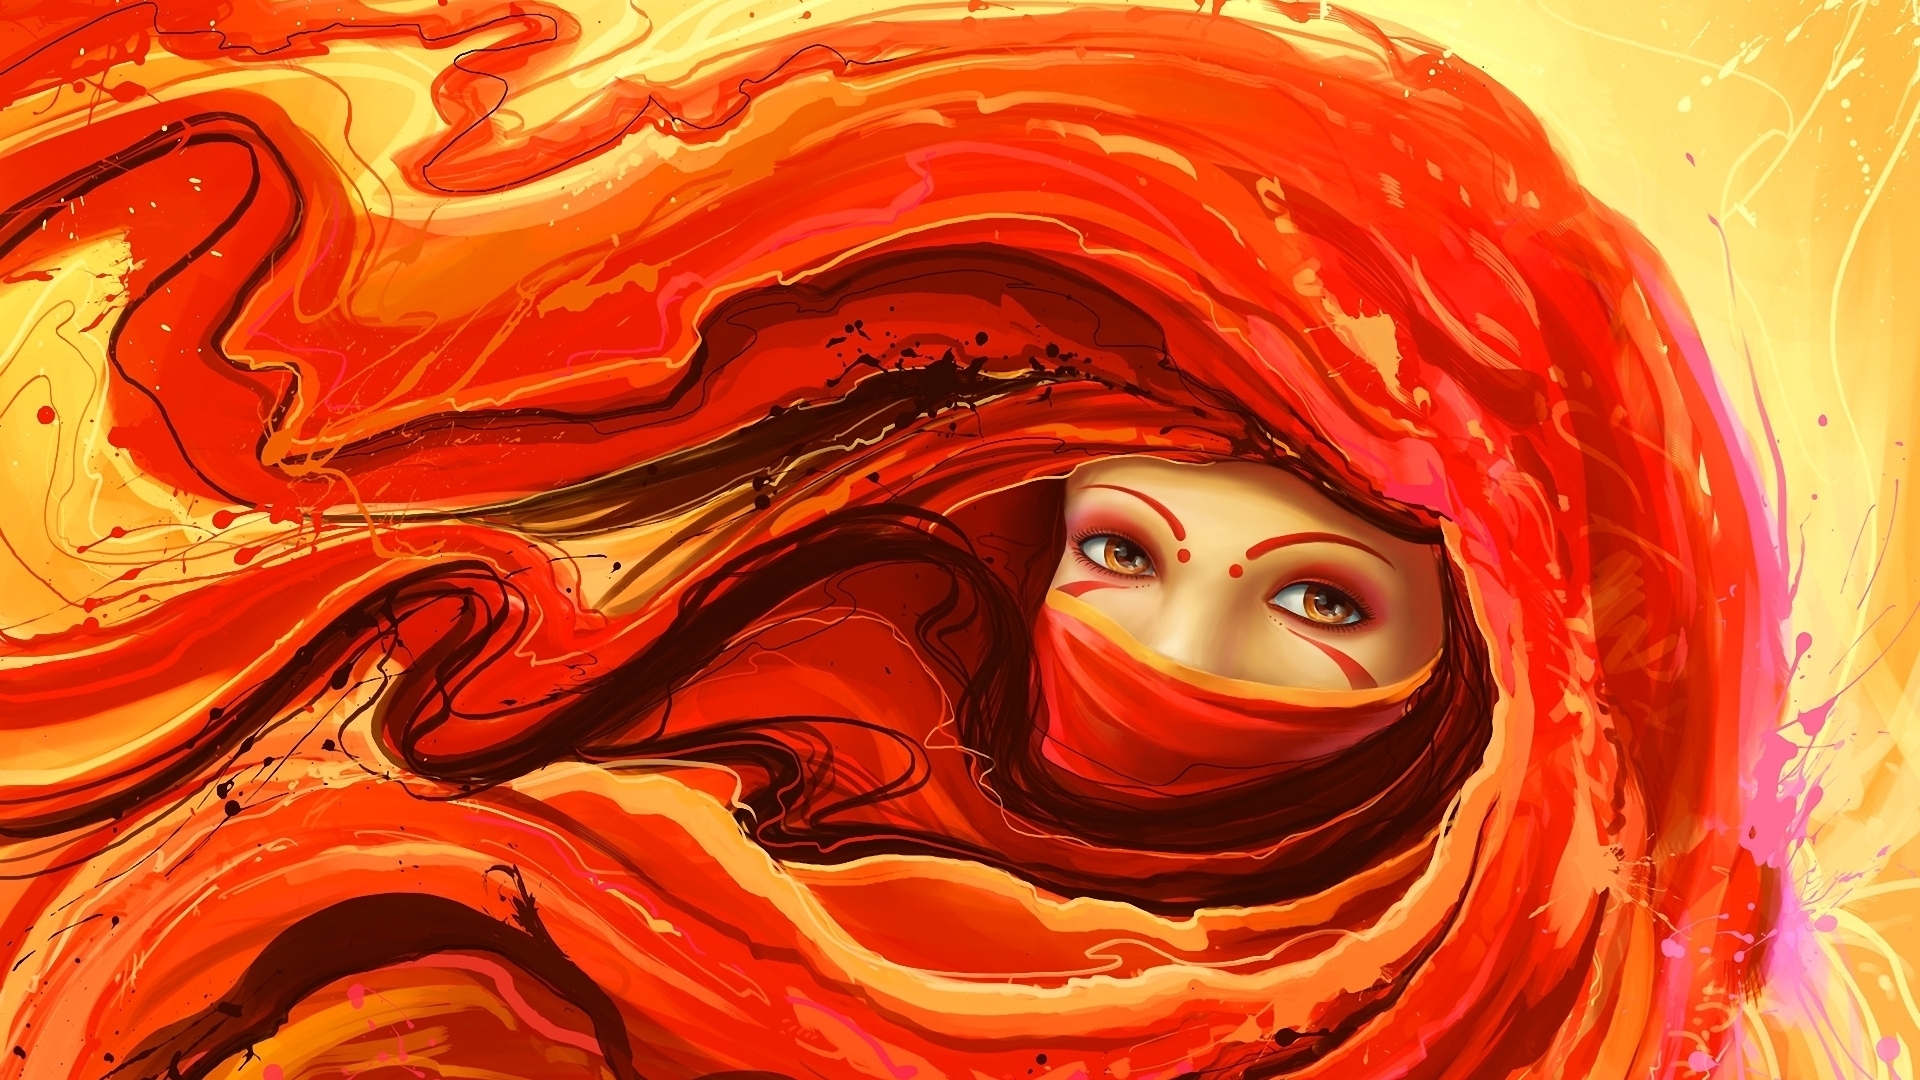 Woman Face Art for 1920 x 1080 HDTV 1080p resolution